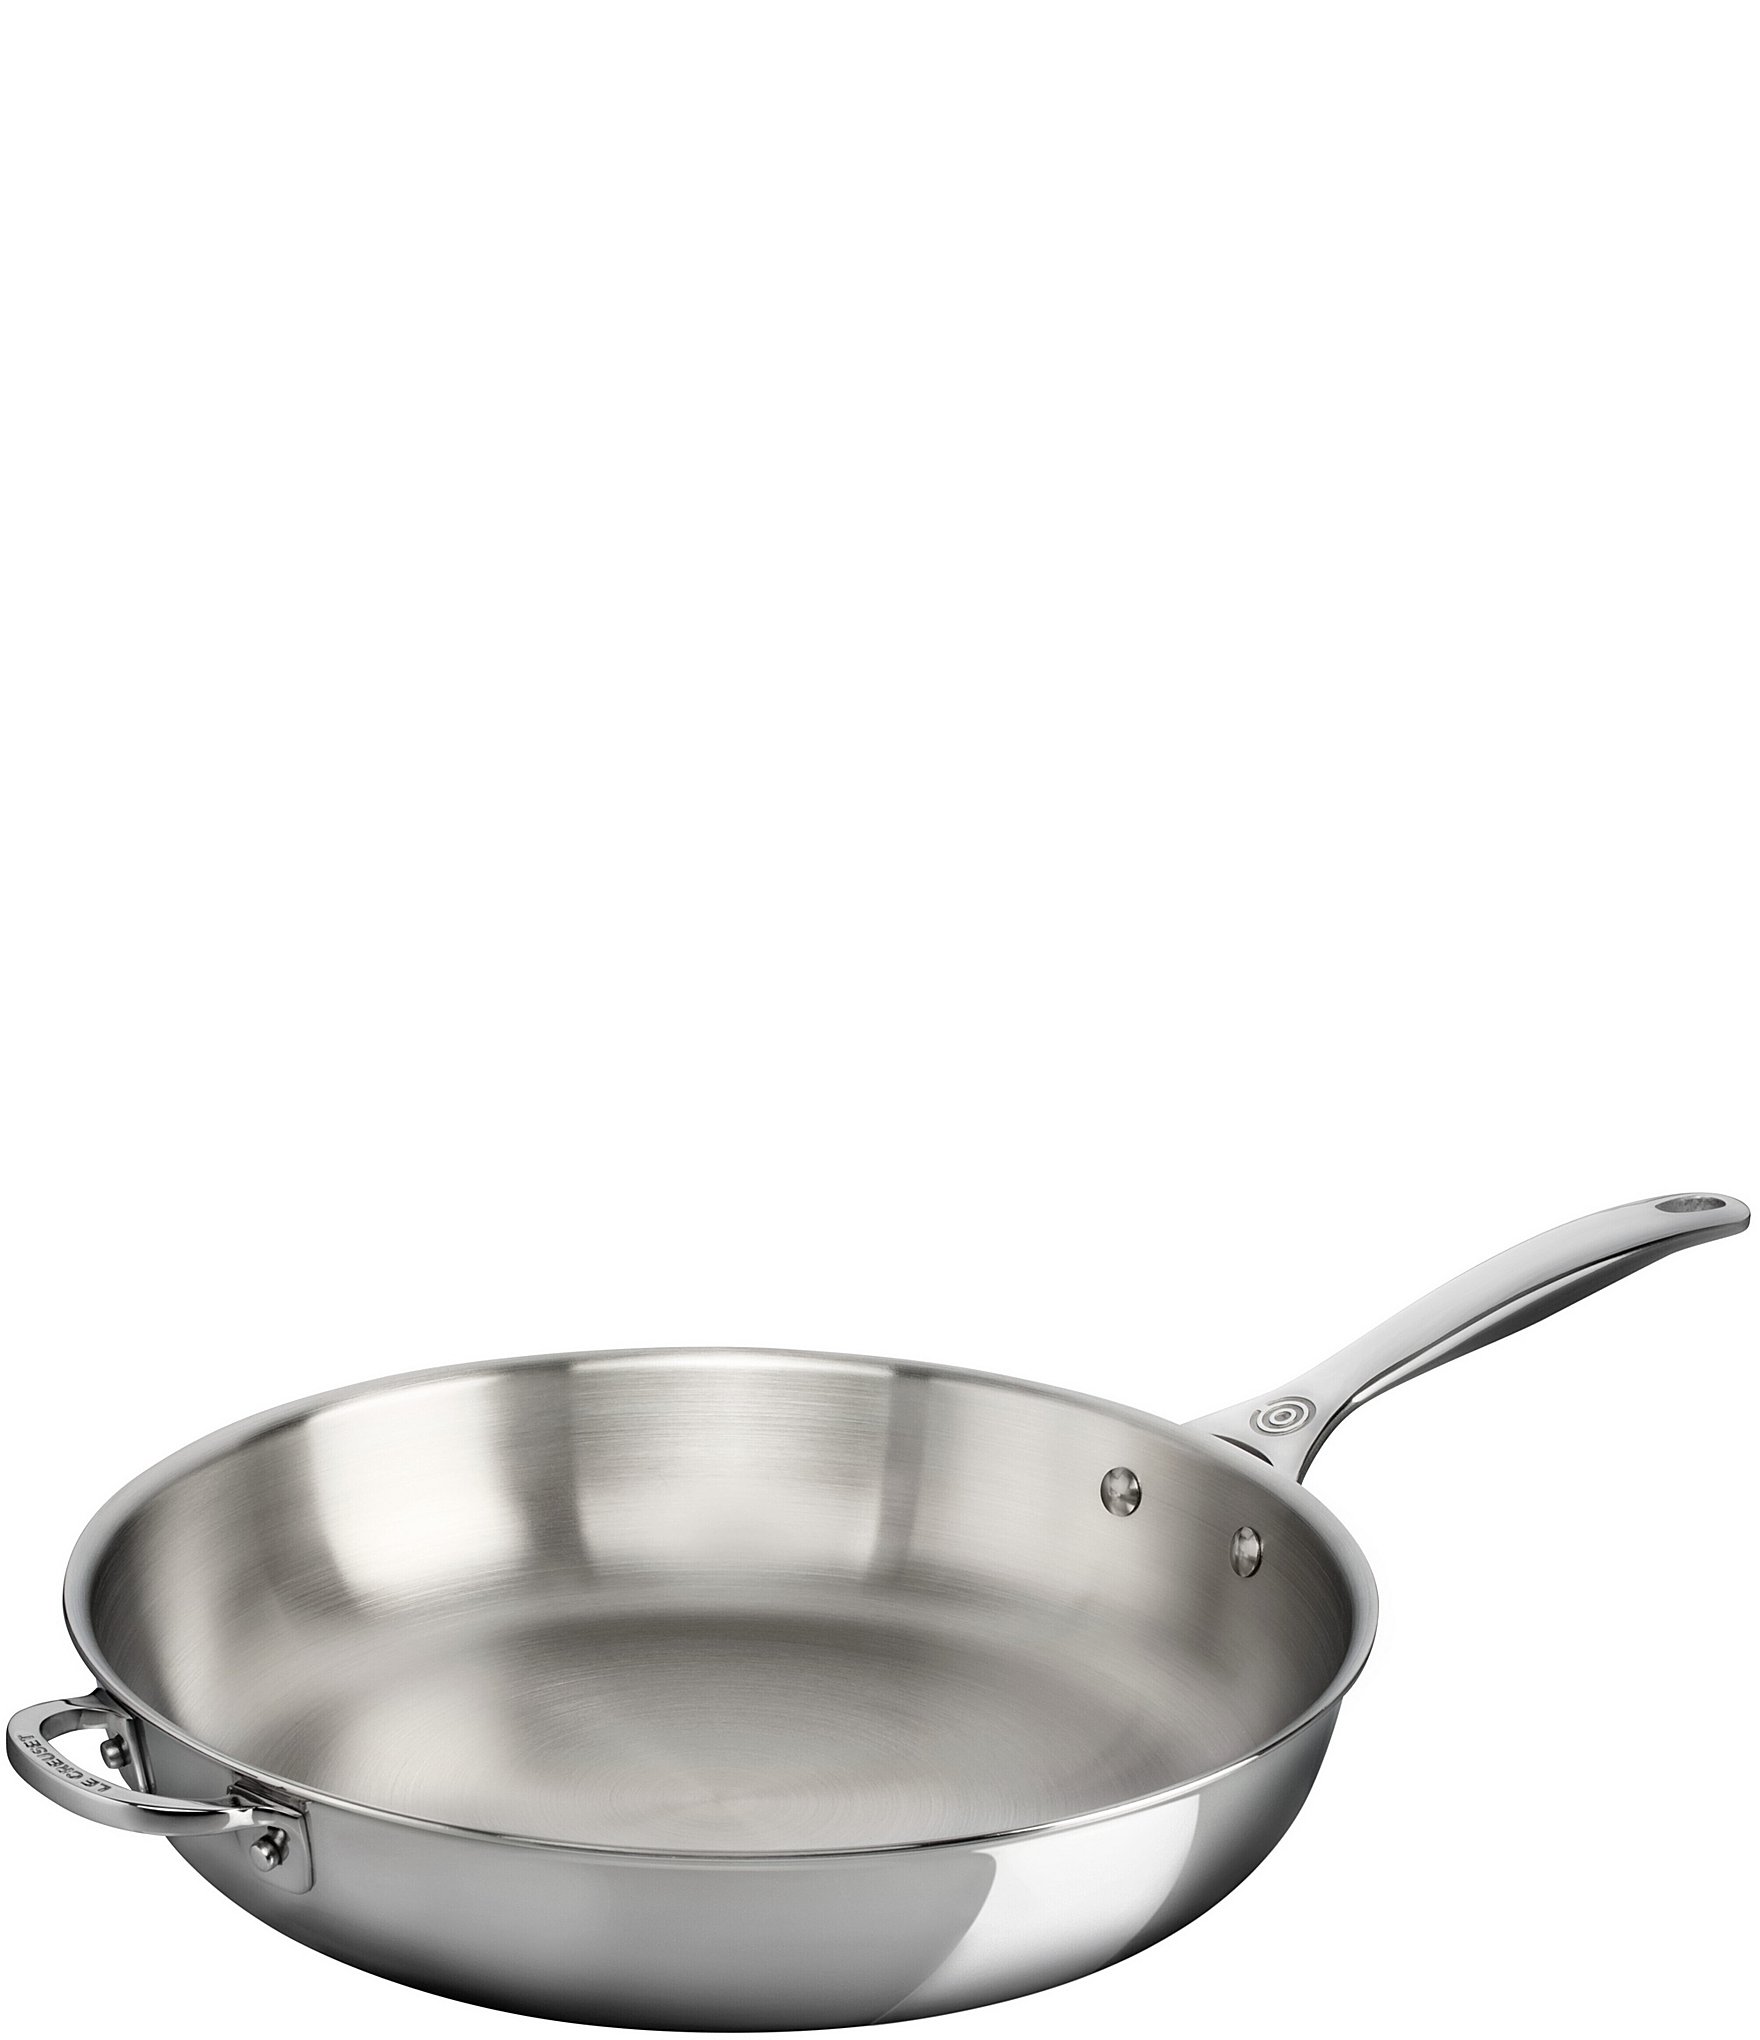 Le Creuset Tri-Ply Stainless Steel 12.5